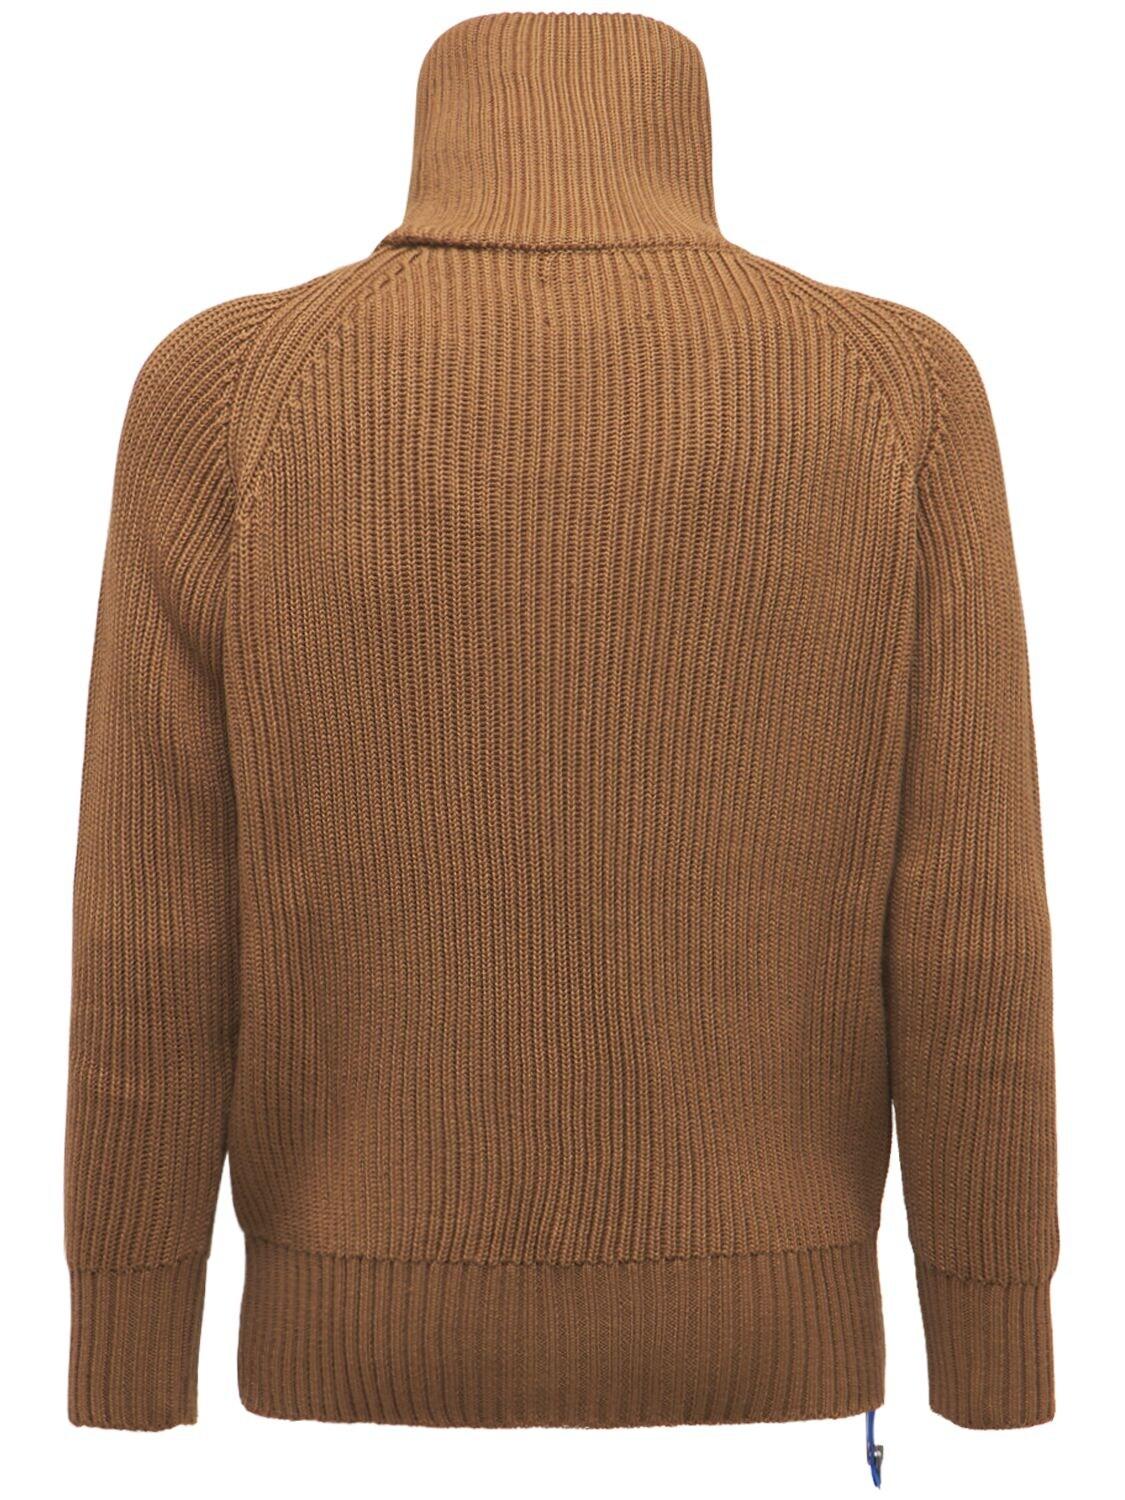 LC23 Merino Wool & Acrylic Knit Sweater in Brown for Men - Lyst